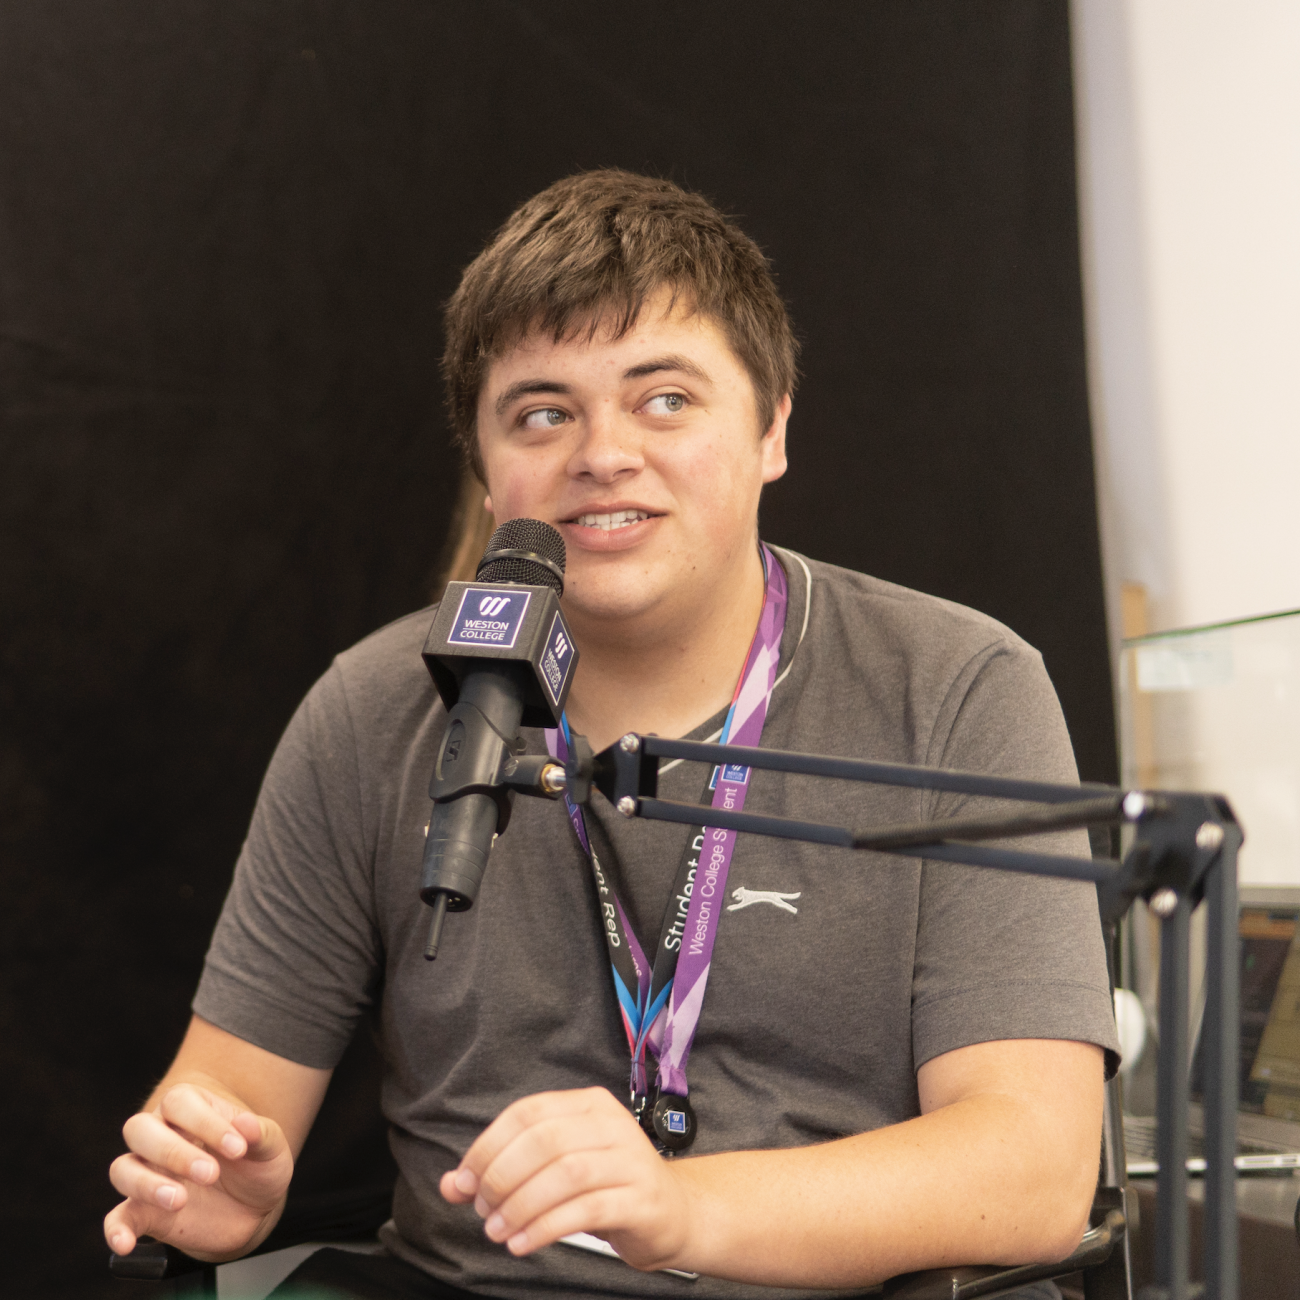 Male student radio host talking into microphone